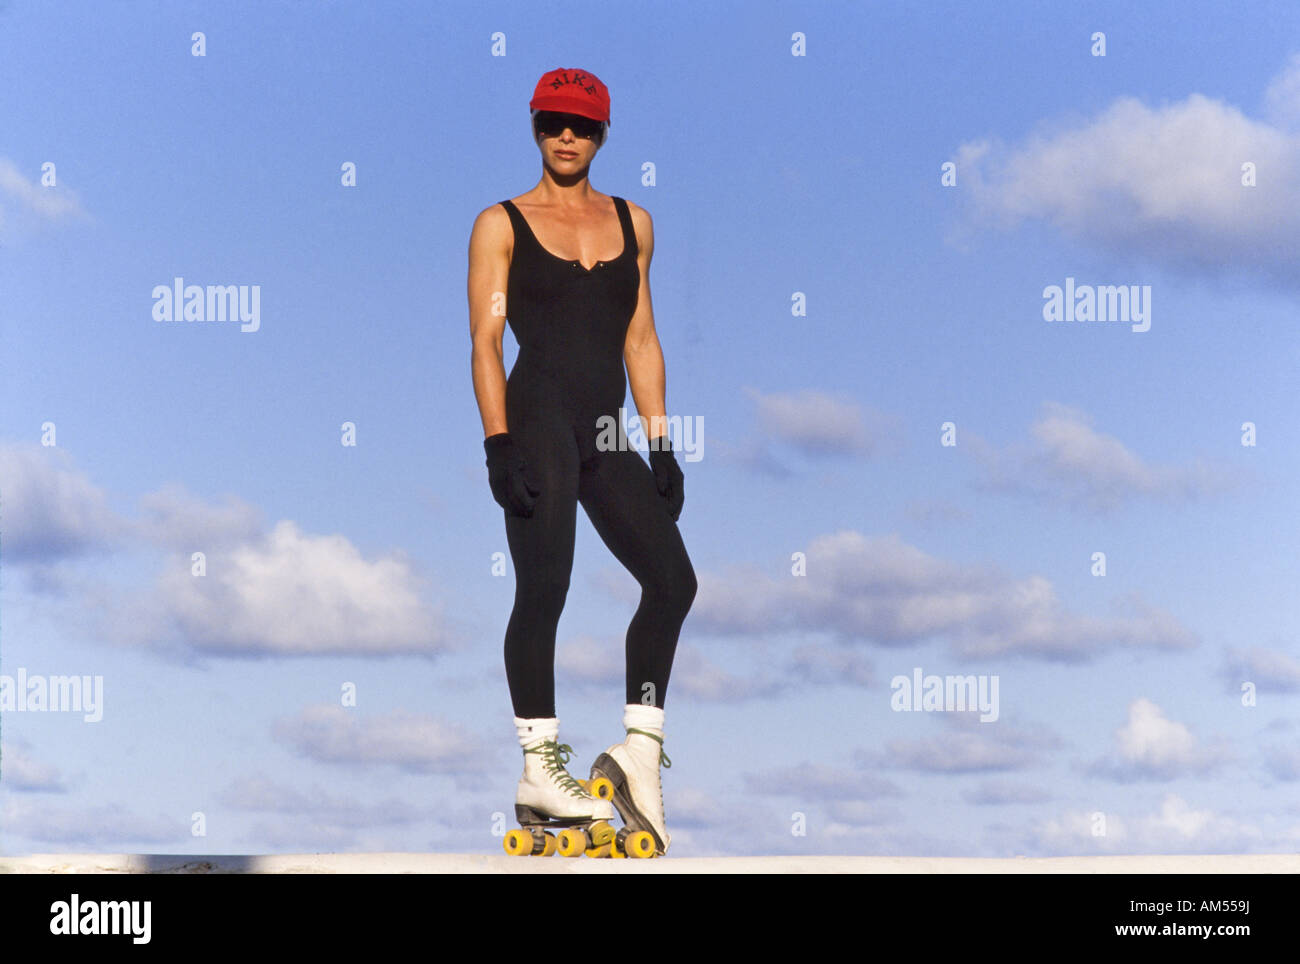 Woman exercising with rollerblades, South Beach, Miami Stock Photo